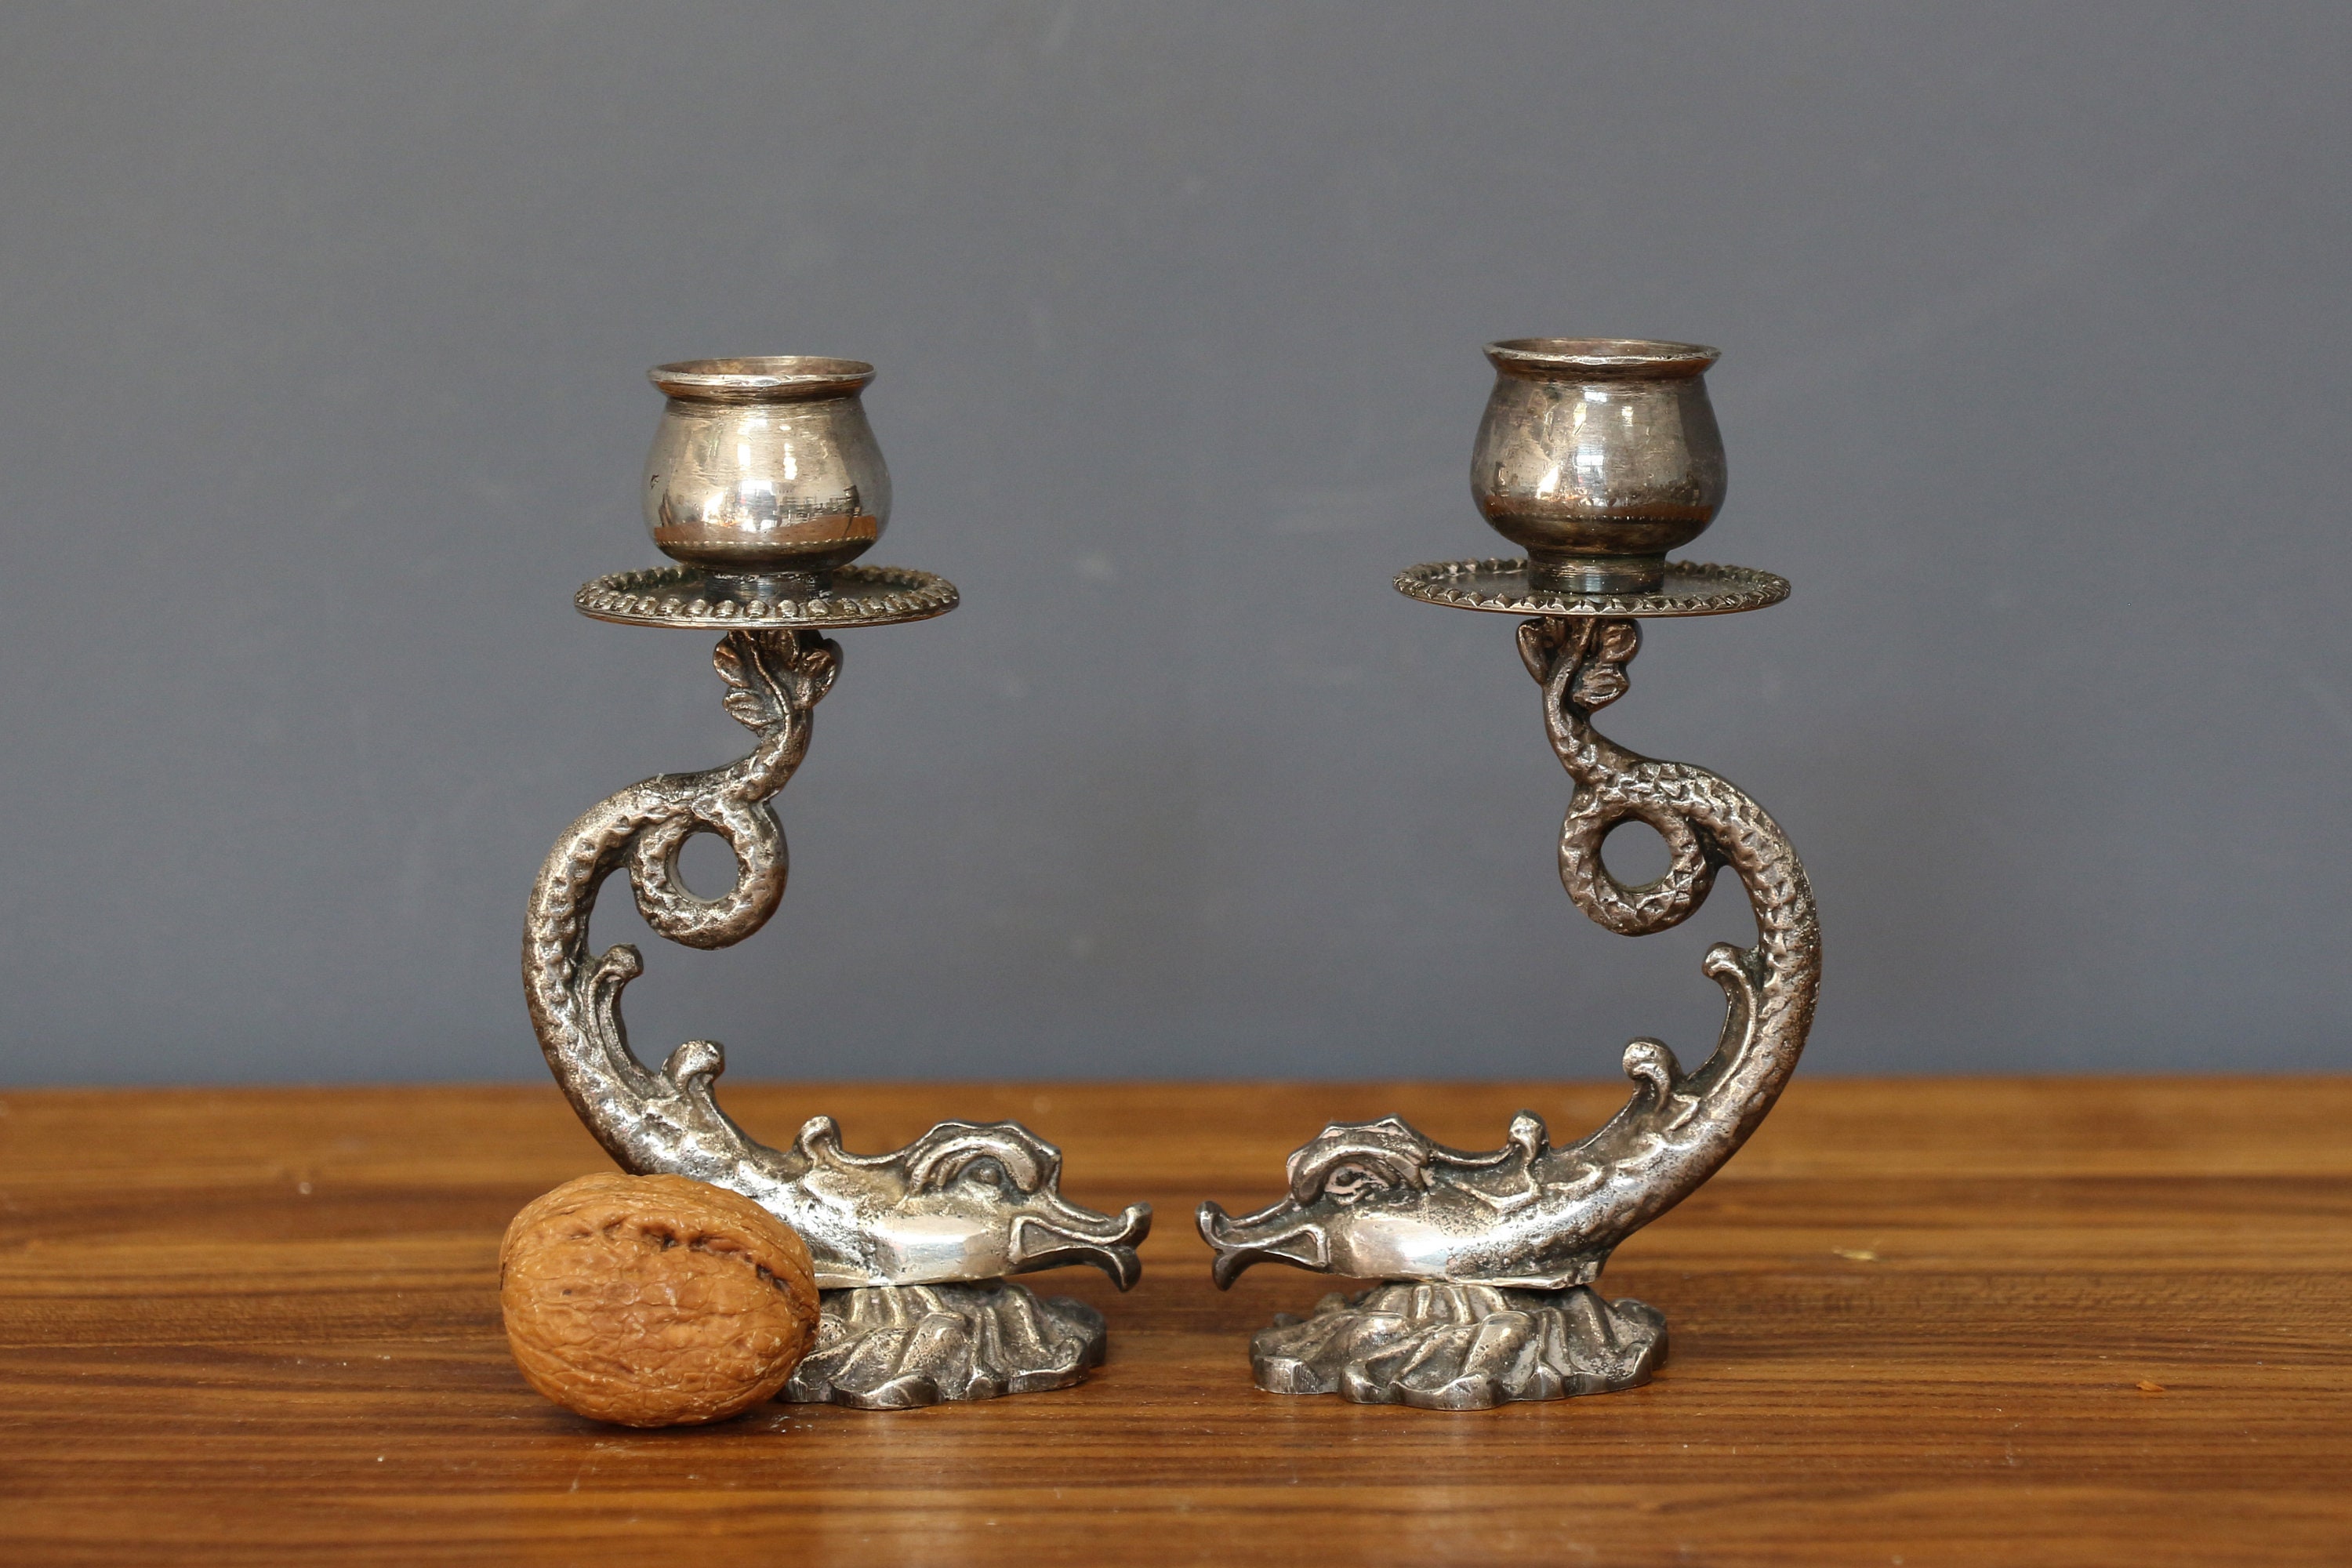 Brass Candlestick Fish Shape, Ornate Sea Fish Candlestick, Bronze Candle  Holder Letter S Shaped, Elegant Small Serpent Fish Candle Holder. 